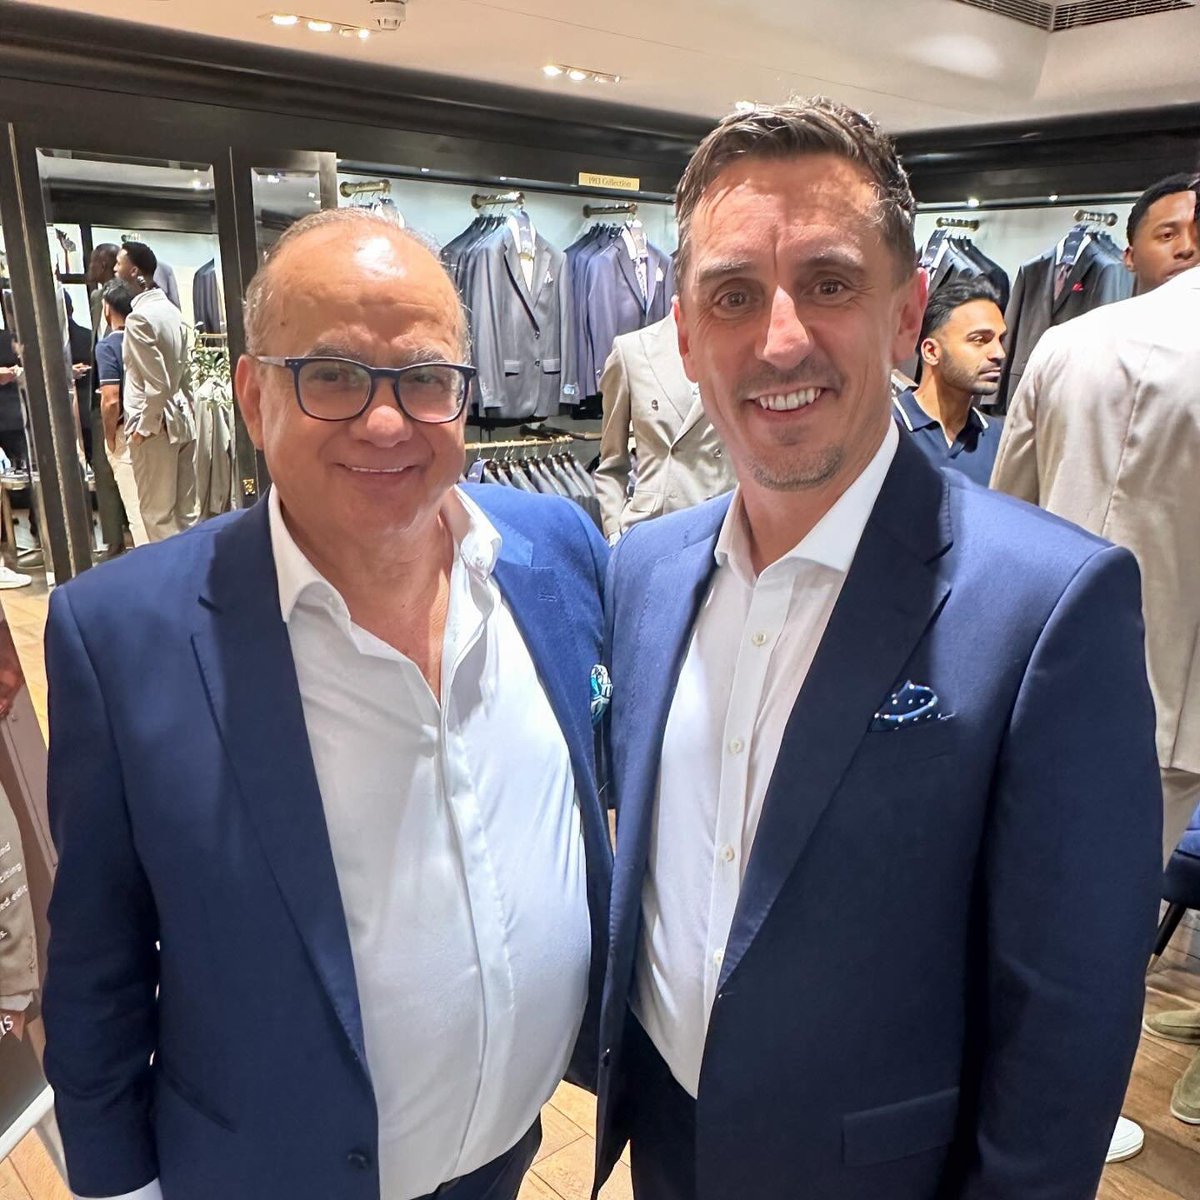 Did you see i’ve been hanging out with 2 of my favourite business partners in the world last week? @GNev2 was down in London to launch his new clothing edit with @toukersuleyman ’s company - @hawesandcurtis so they were having a bit of a shindig at their flagship shop!